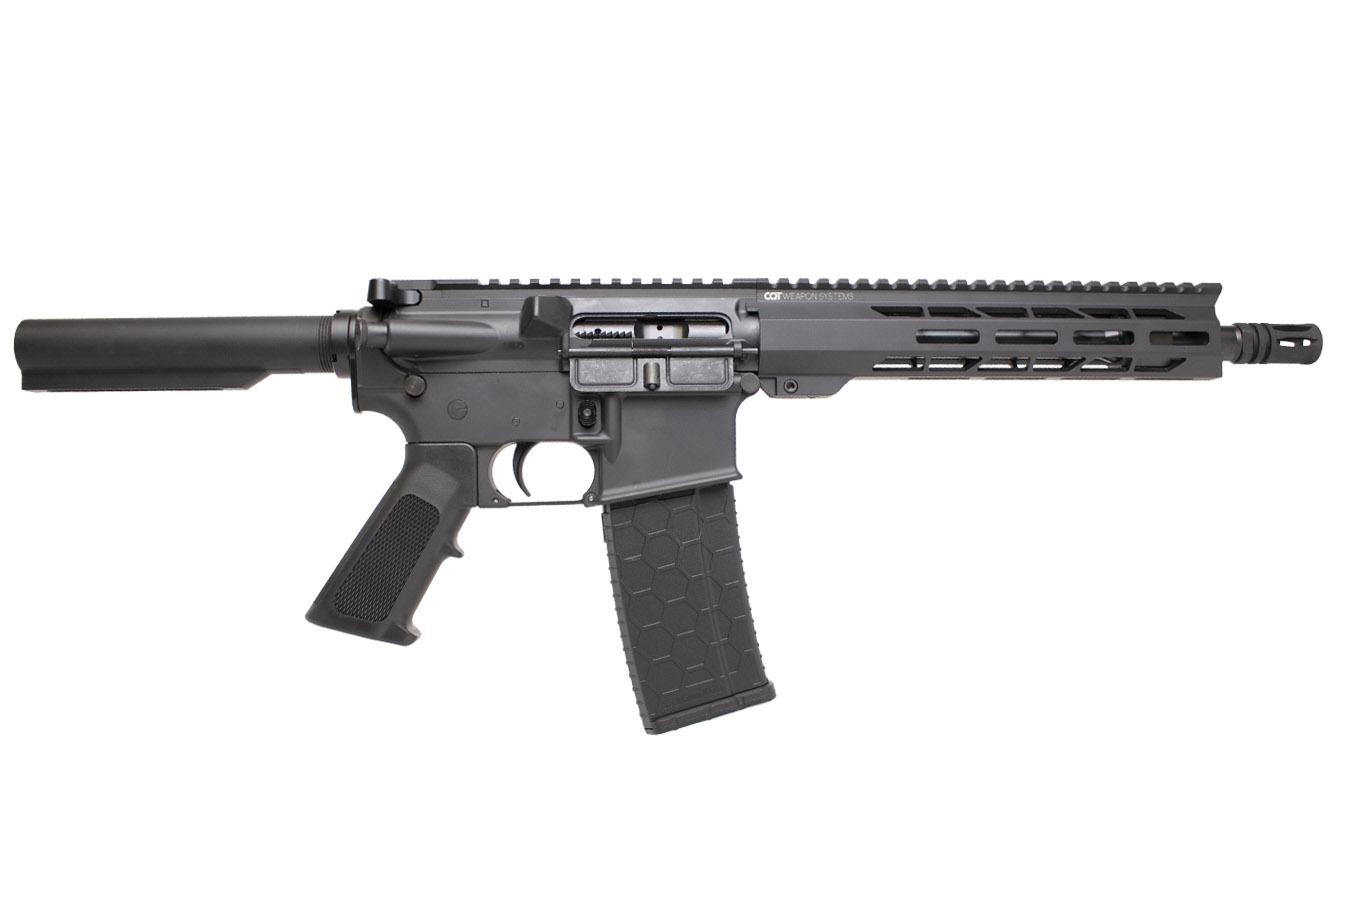 CQT WEAPON SYSTEMS CQT15 5.56mm Semi-Auto Pistol with 10.5-Inch Barrel